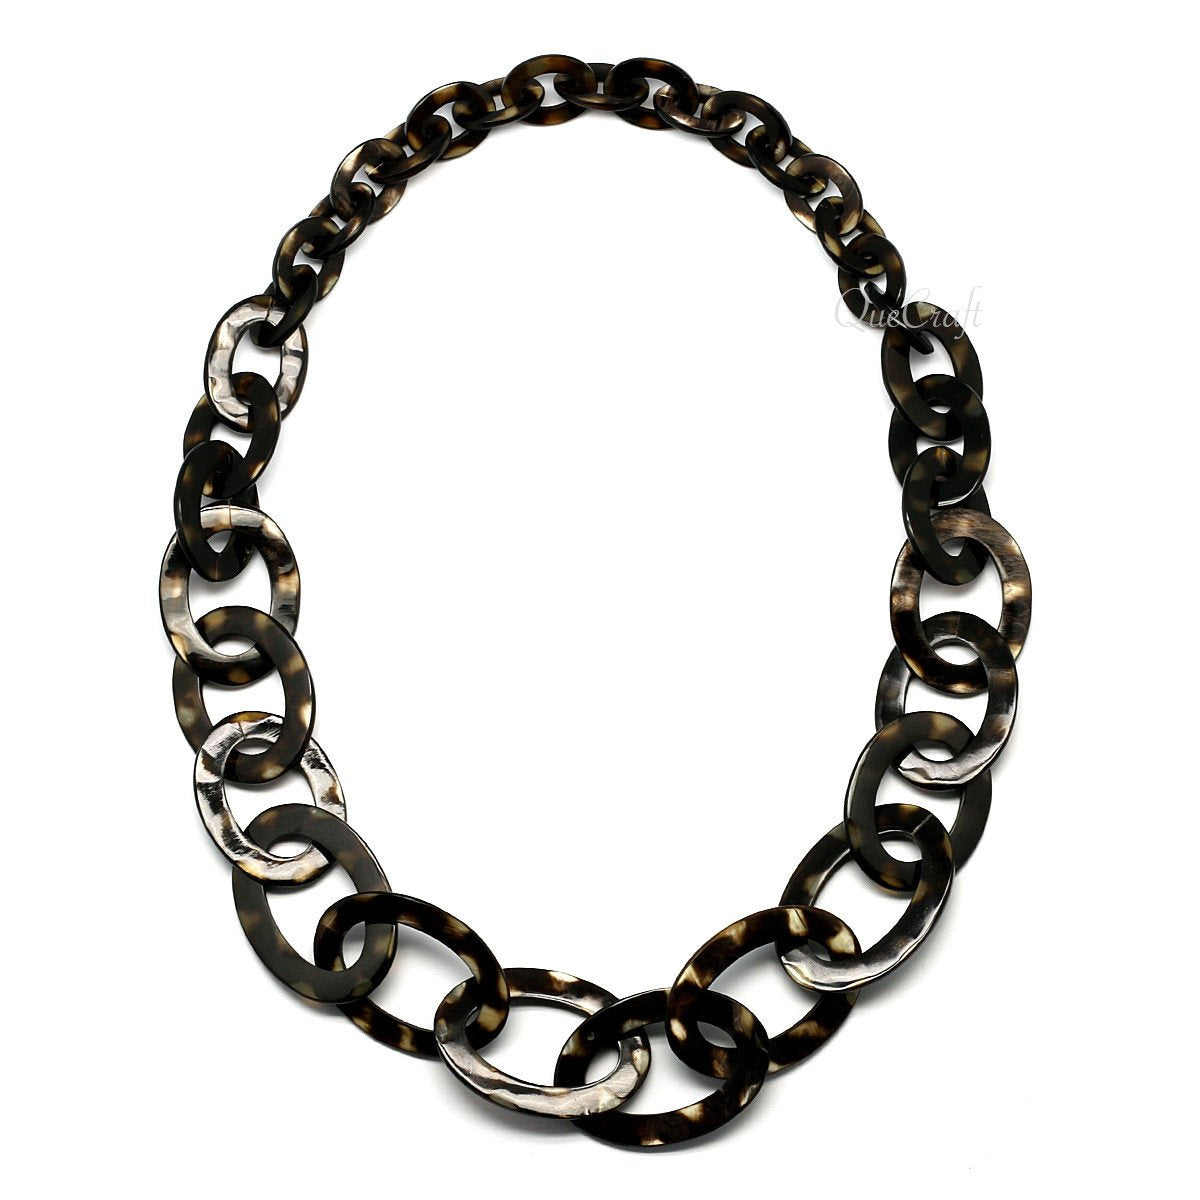 Horn Chain Necklace #9821 - HORN JEWELRY